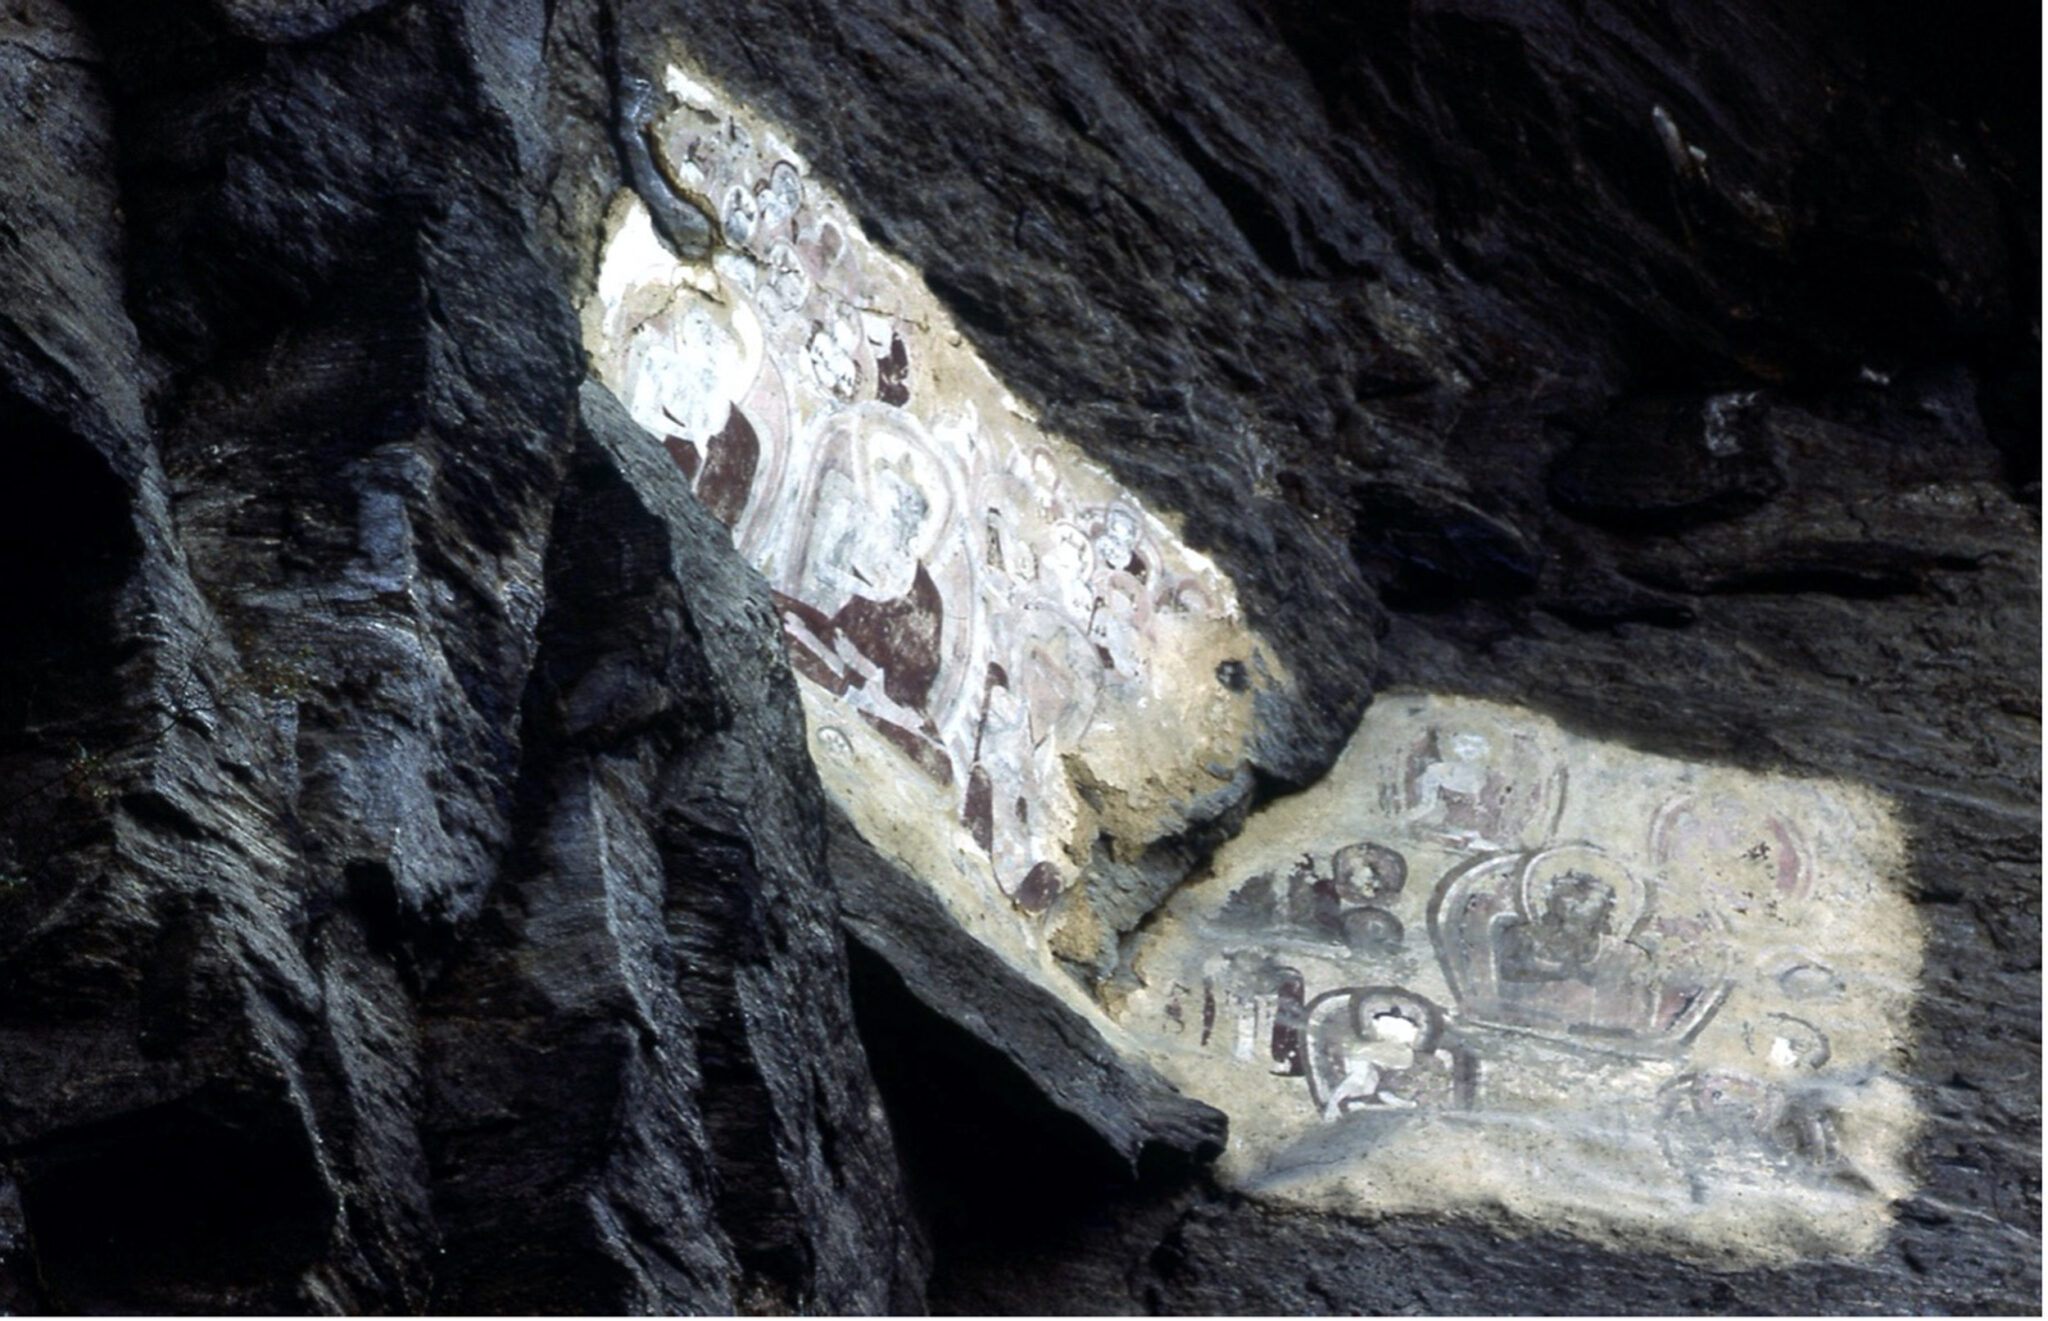 Photograph of faded image depicting deities painted on white material applied to face of craggy rock